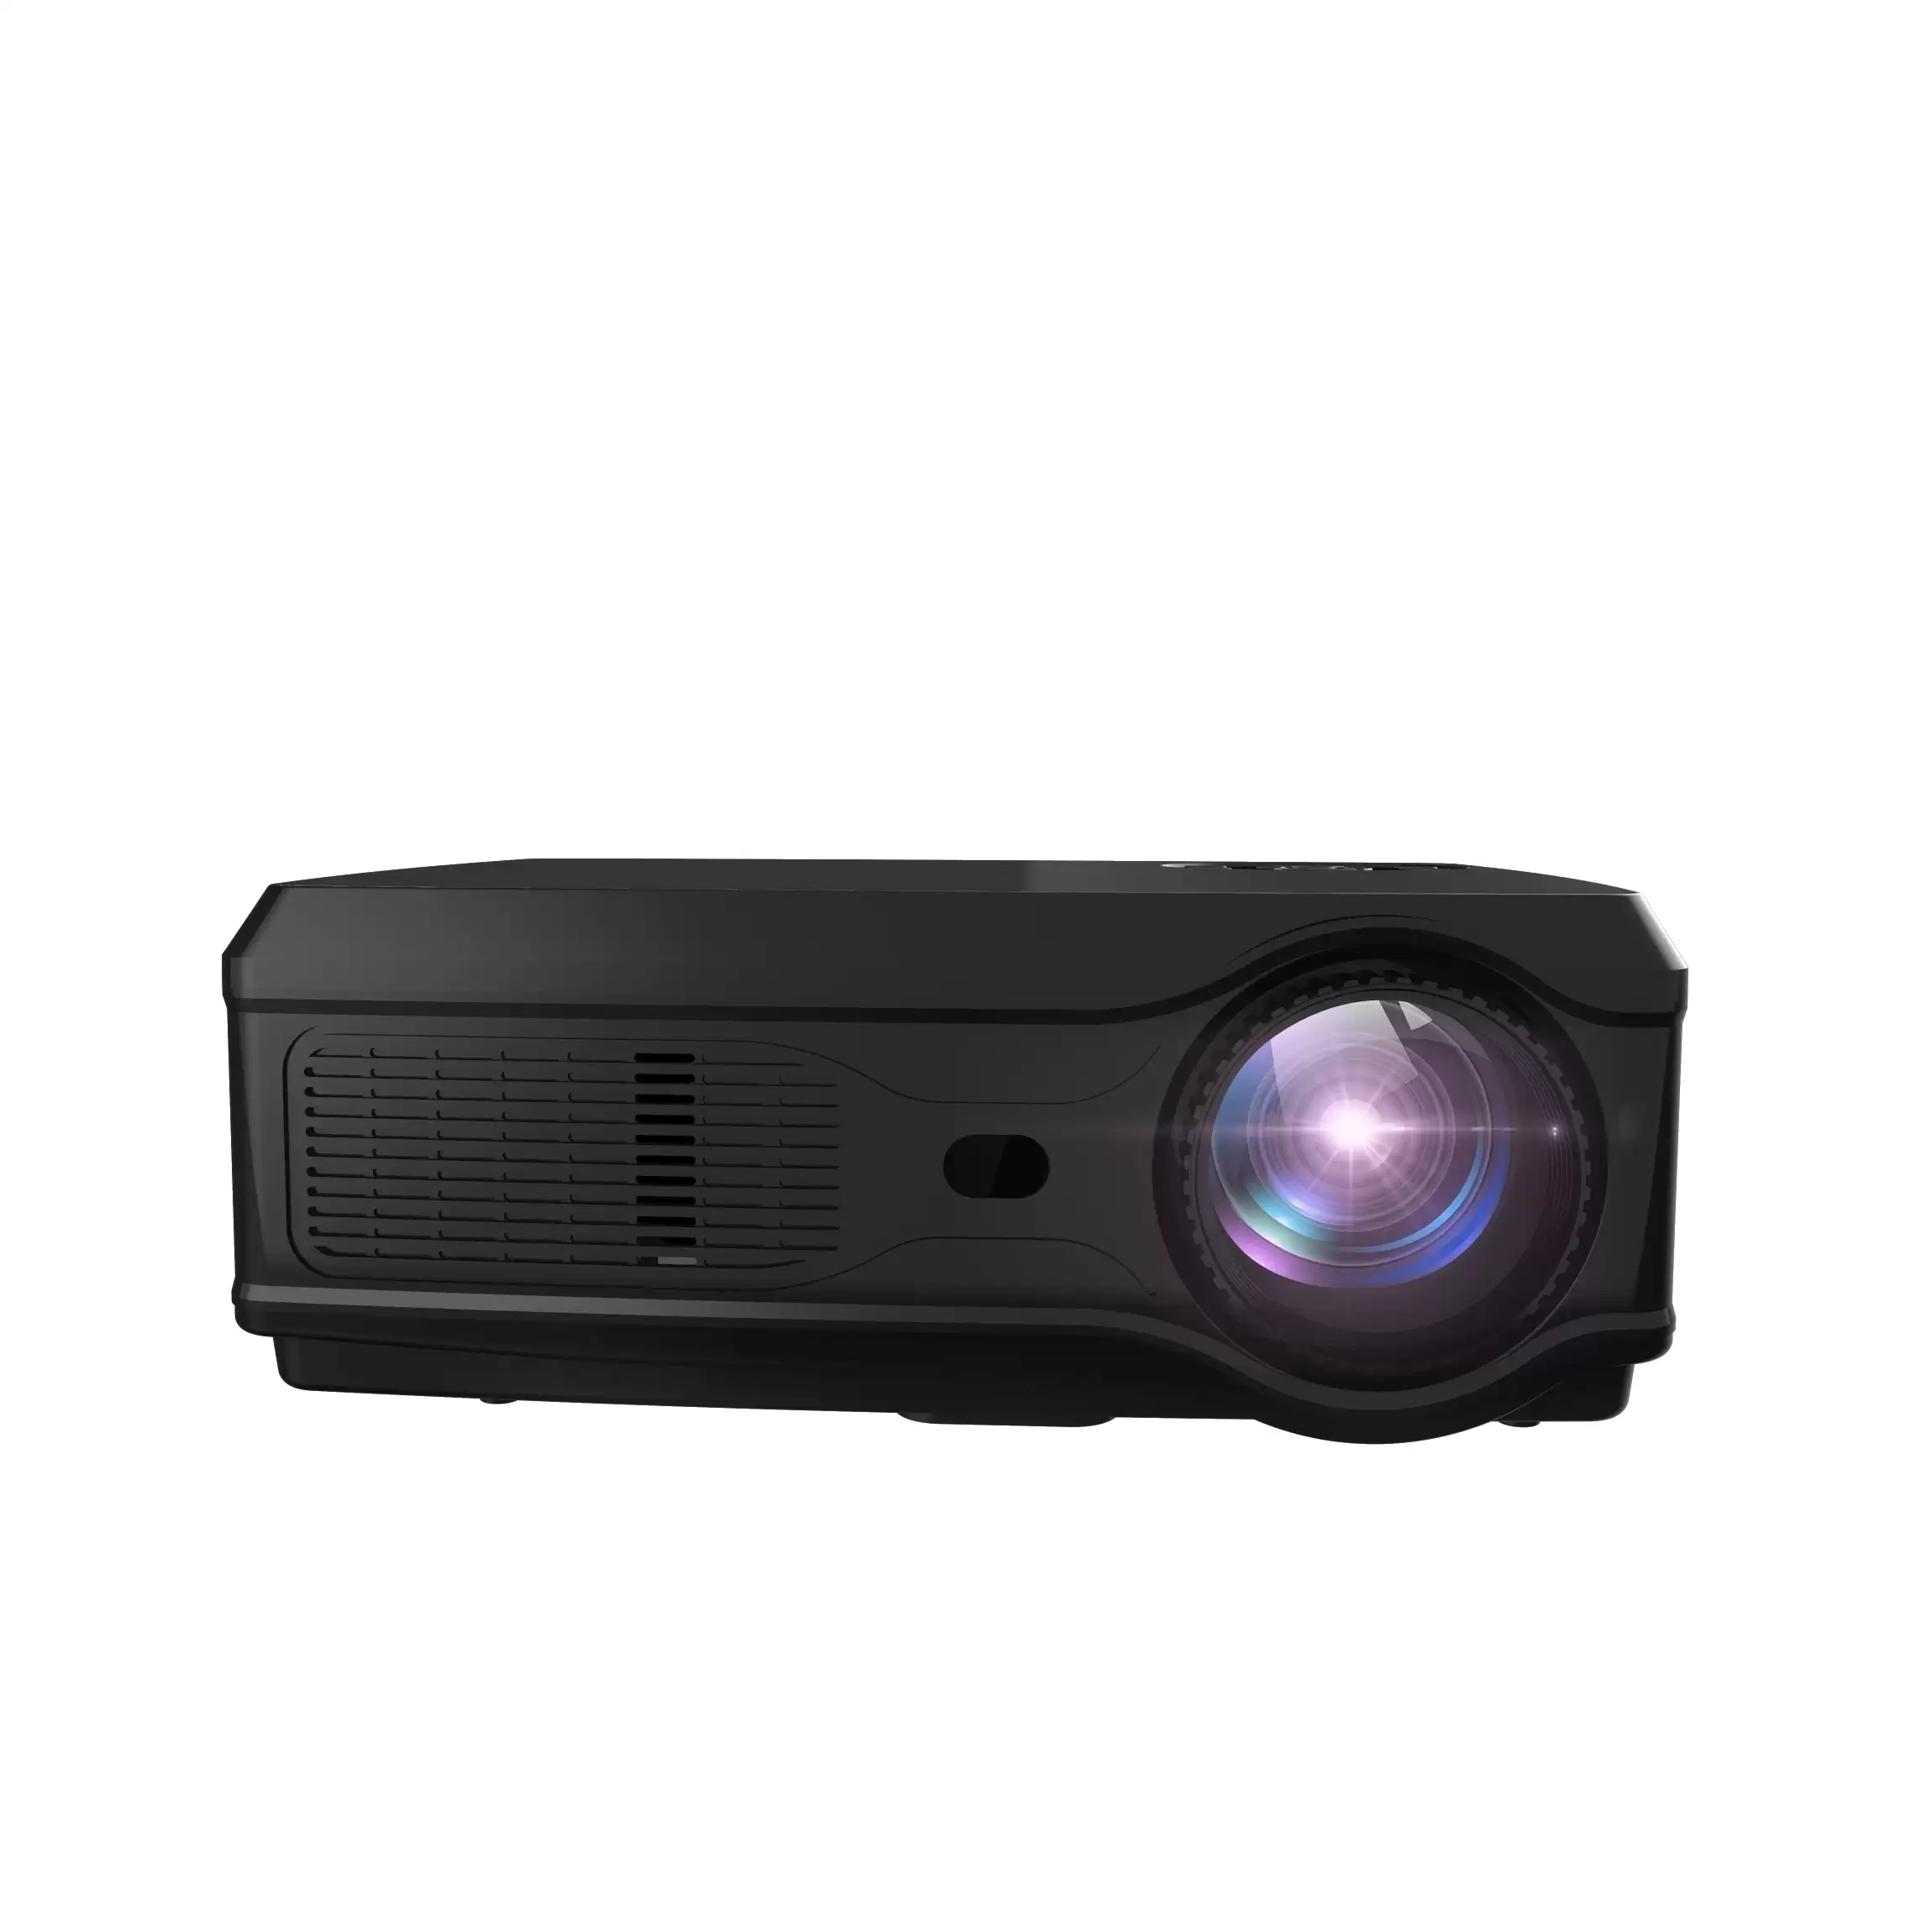 Order In Just Cn?$192.94ncz/usa:176.79 358xw Full Hd Projector 1080p Led Proyector 3d Video Beamer Hdmi For 4k Smart Android 6.0 1g+8g Wireless Wifi Home Cinema Android Version With This Coupon At Banggood